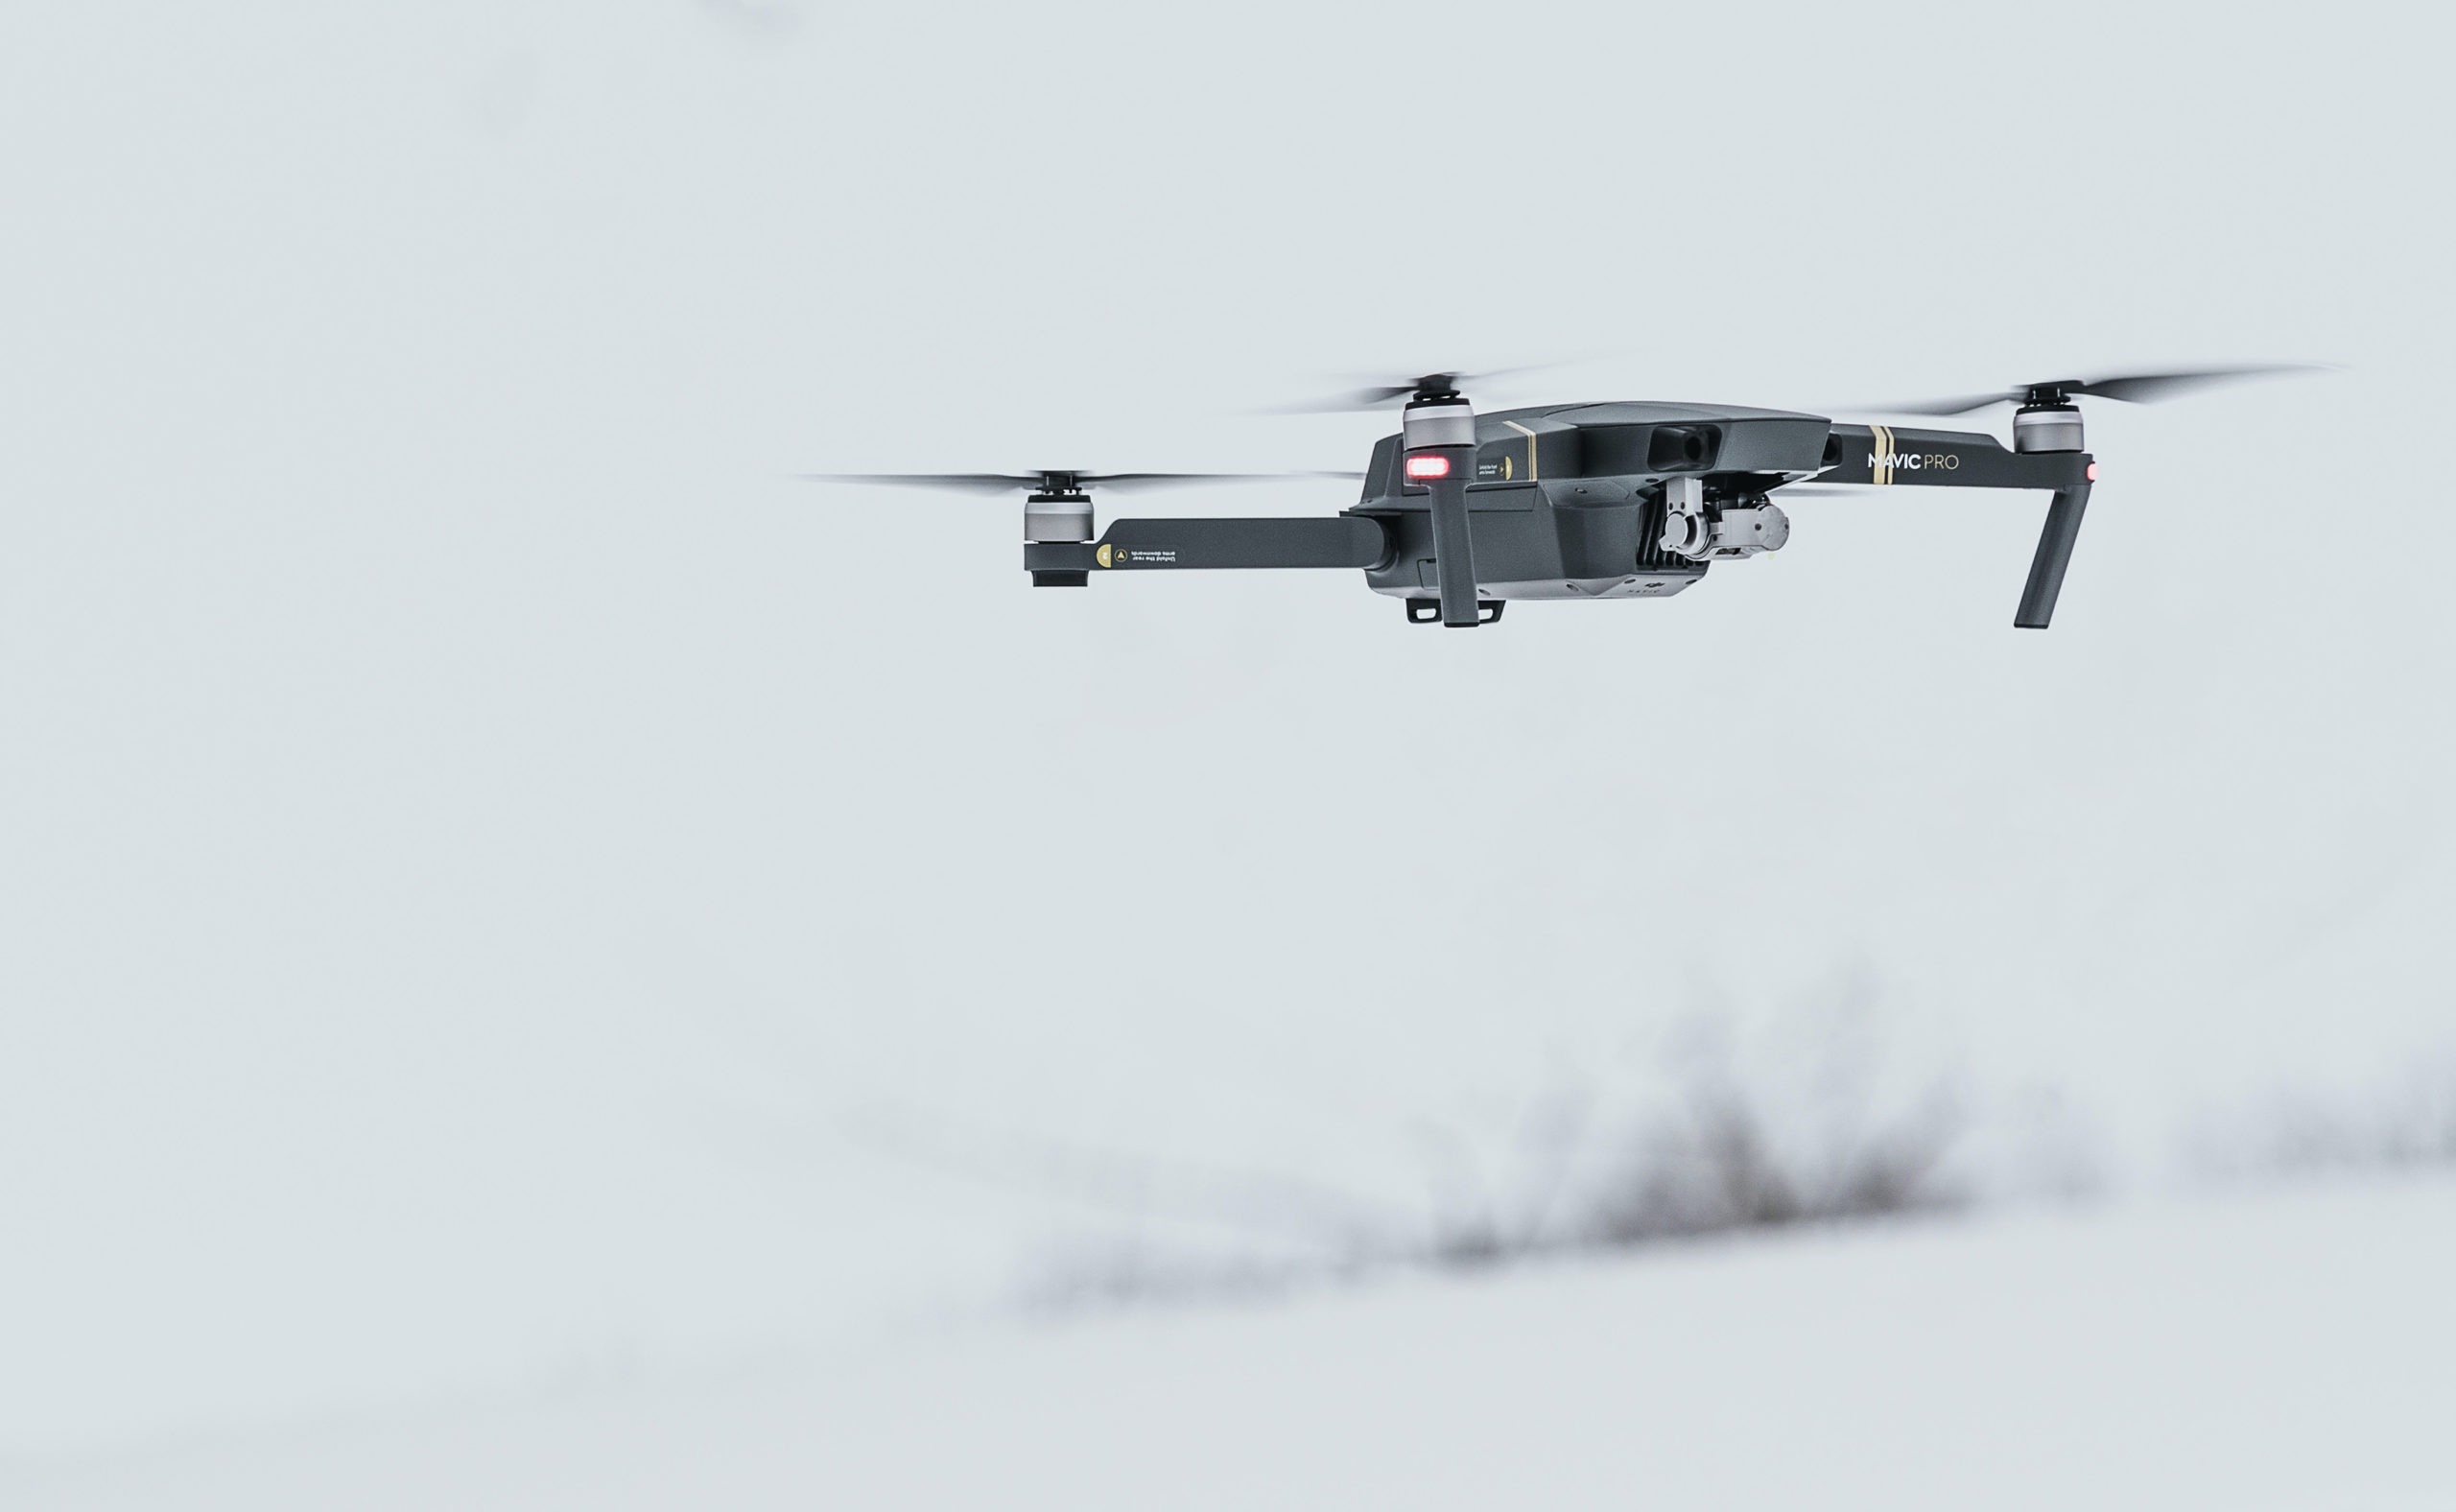 Utah could be among the first states with access to unmanned drone delivery.